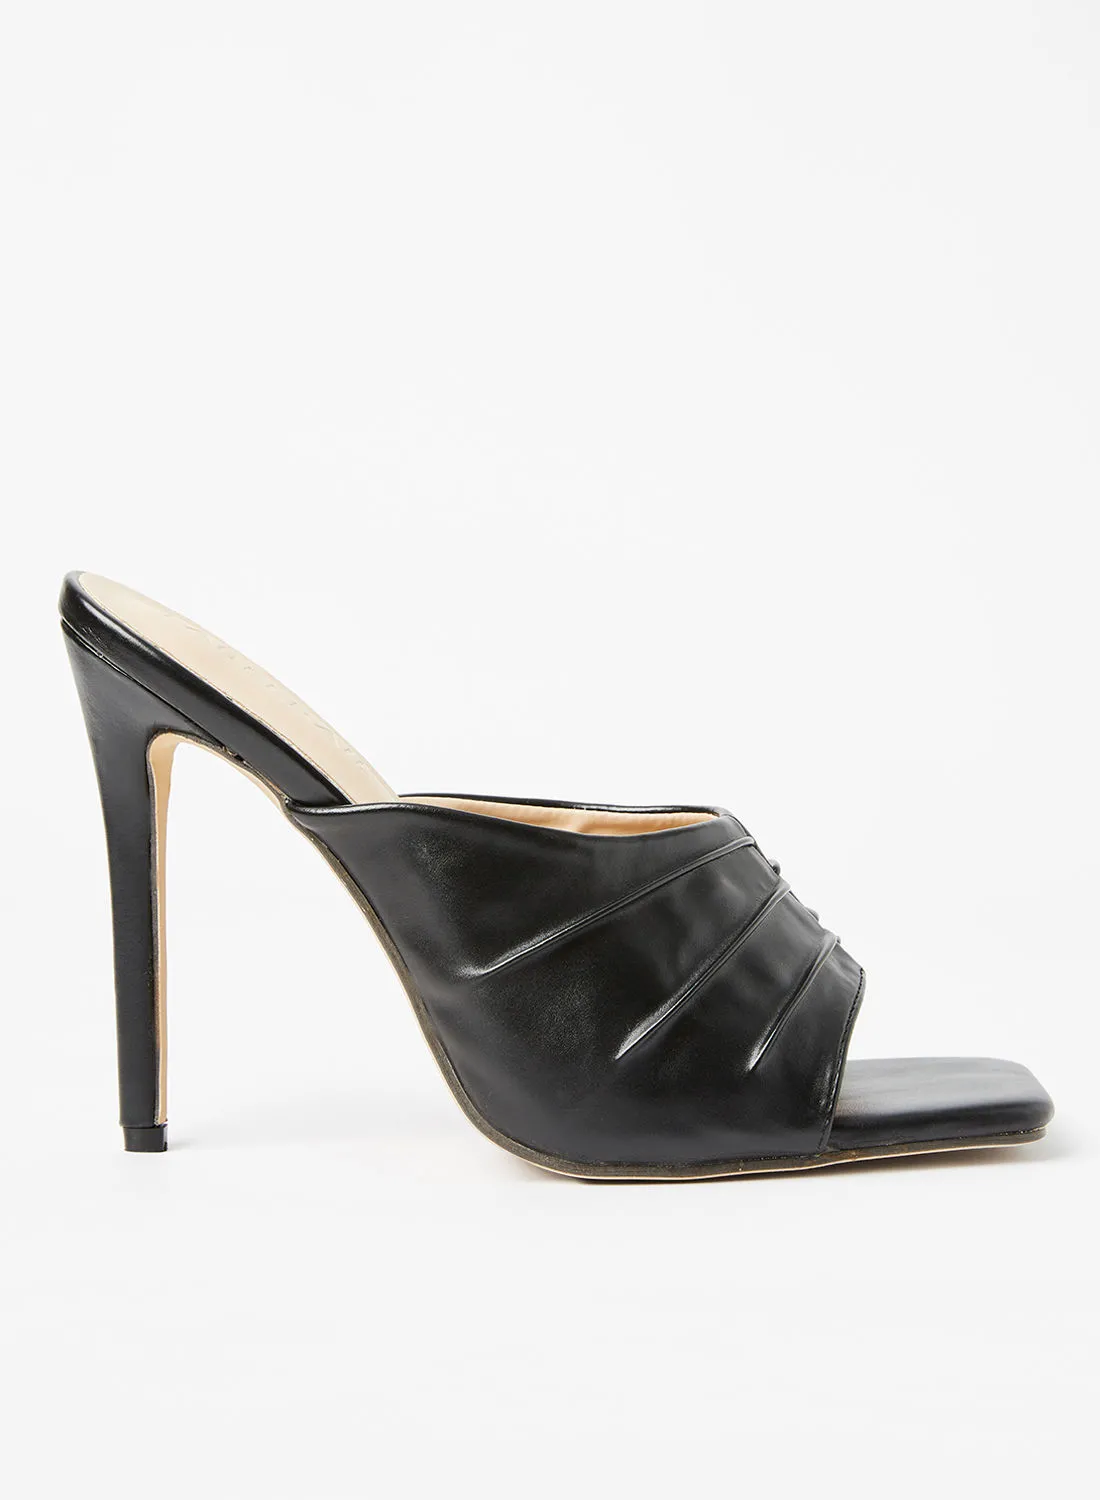 LABEL RAIL Faux Leather High Heel Mules Black